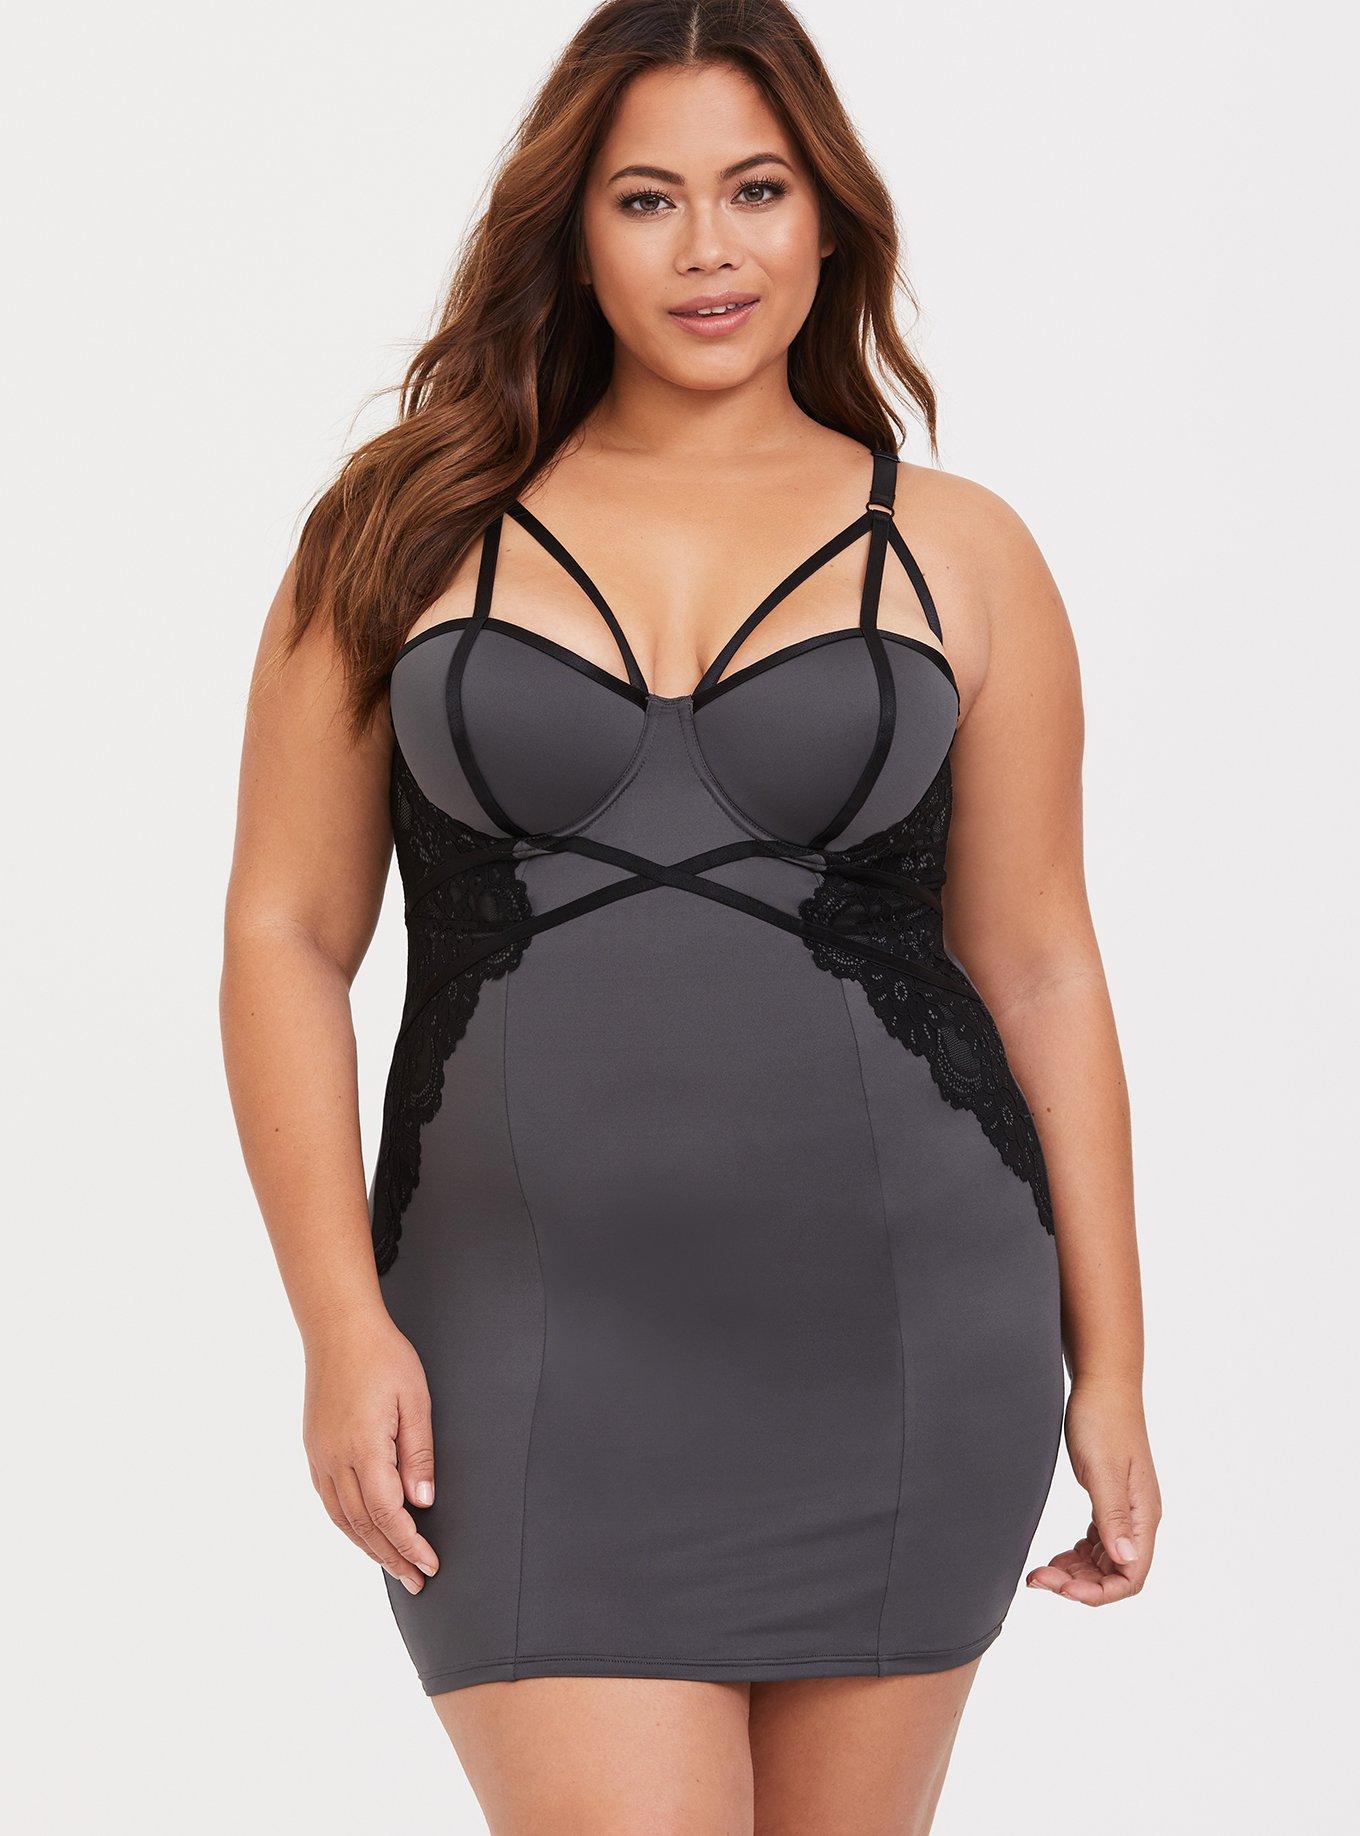 Underwire chemise & thong Obsessive Nighties